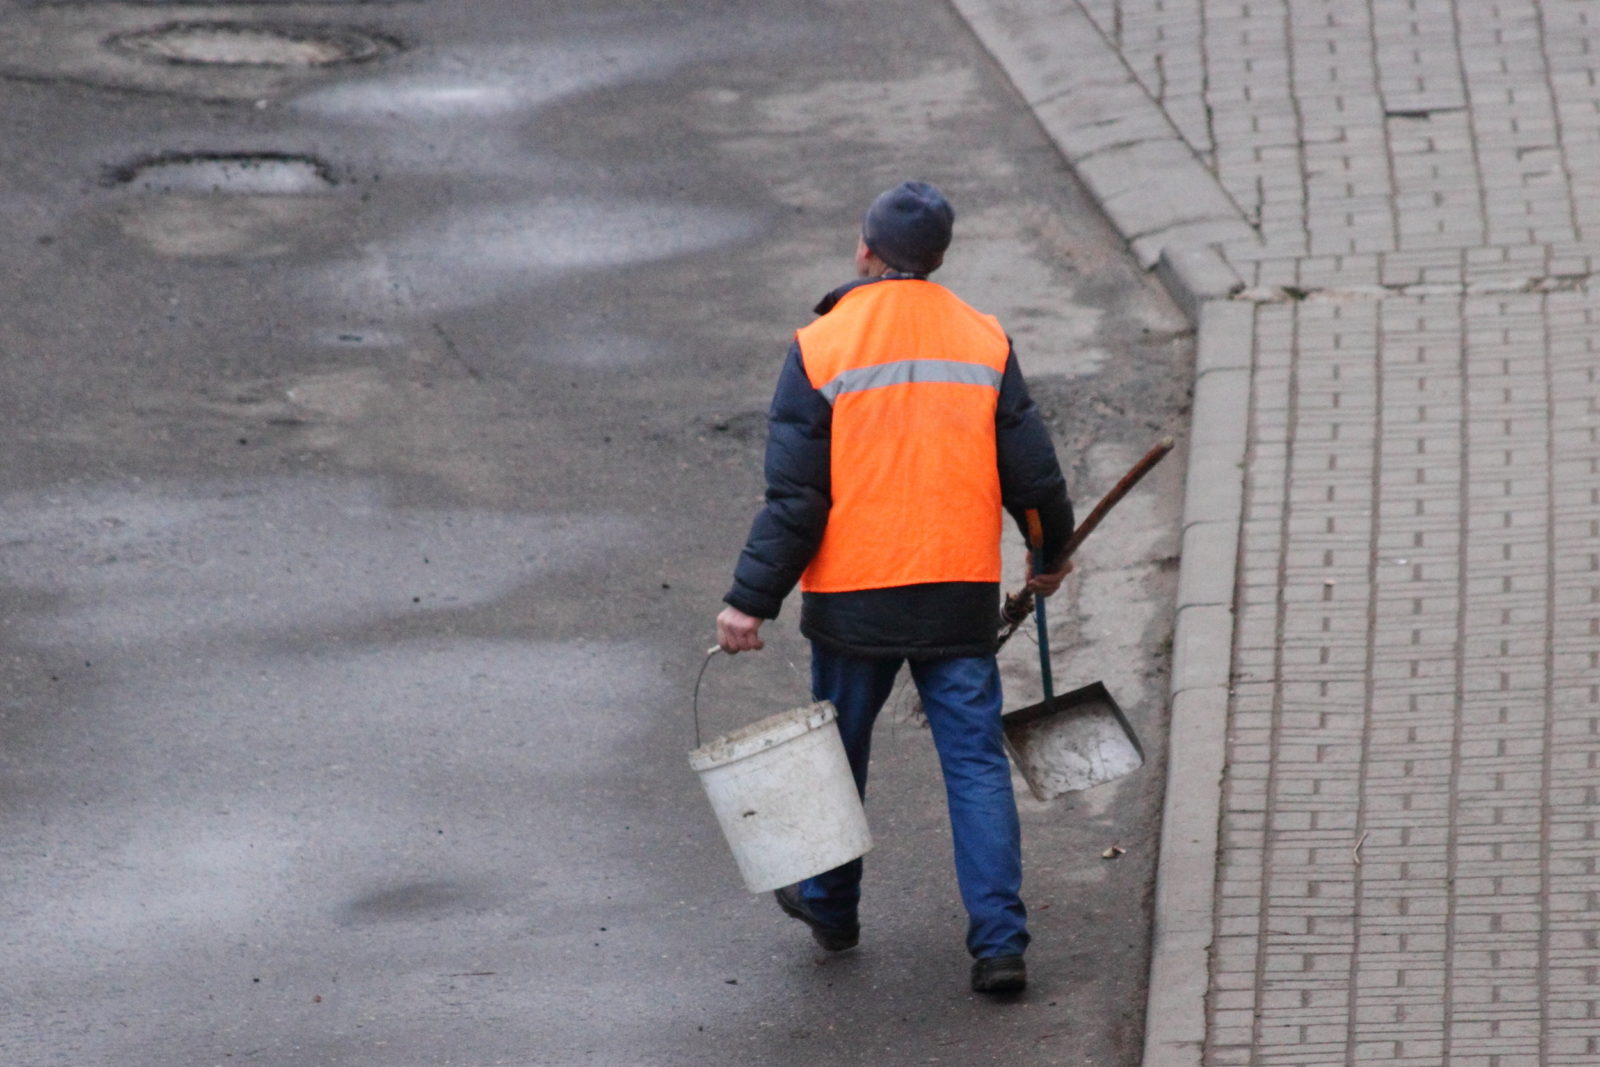 A janitor man in an orange vest walks with a bucket and scoop along an asphalt street, top view from behind